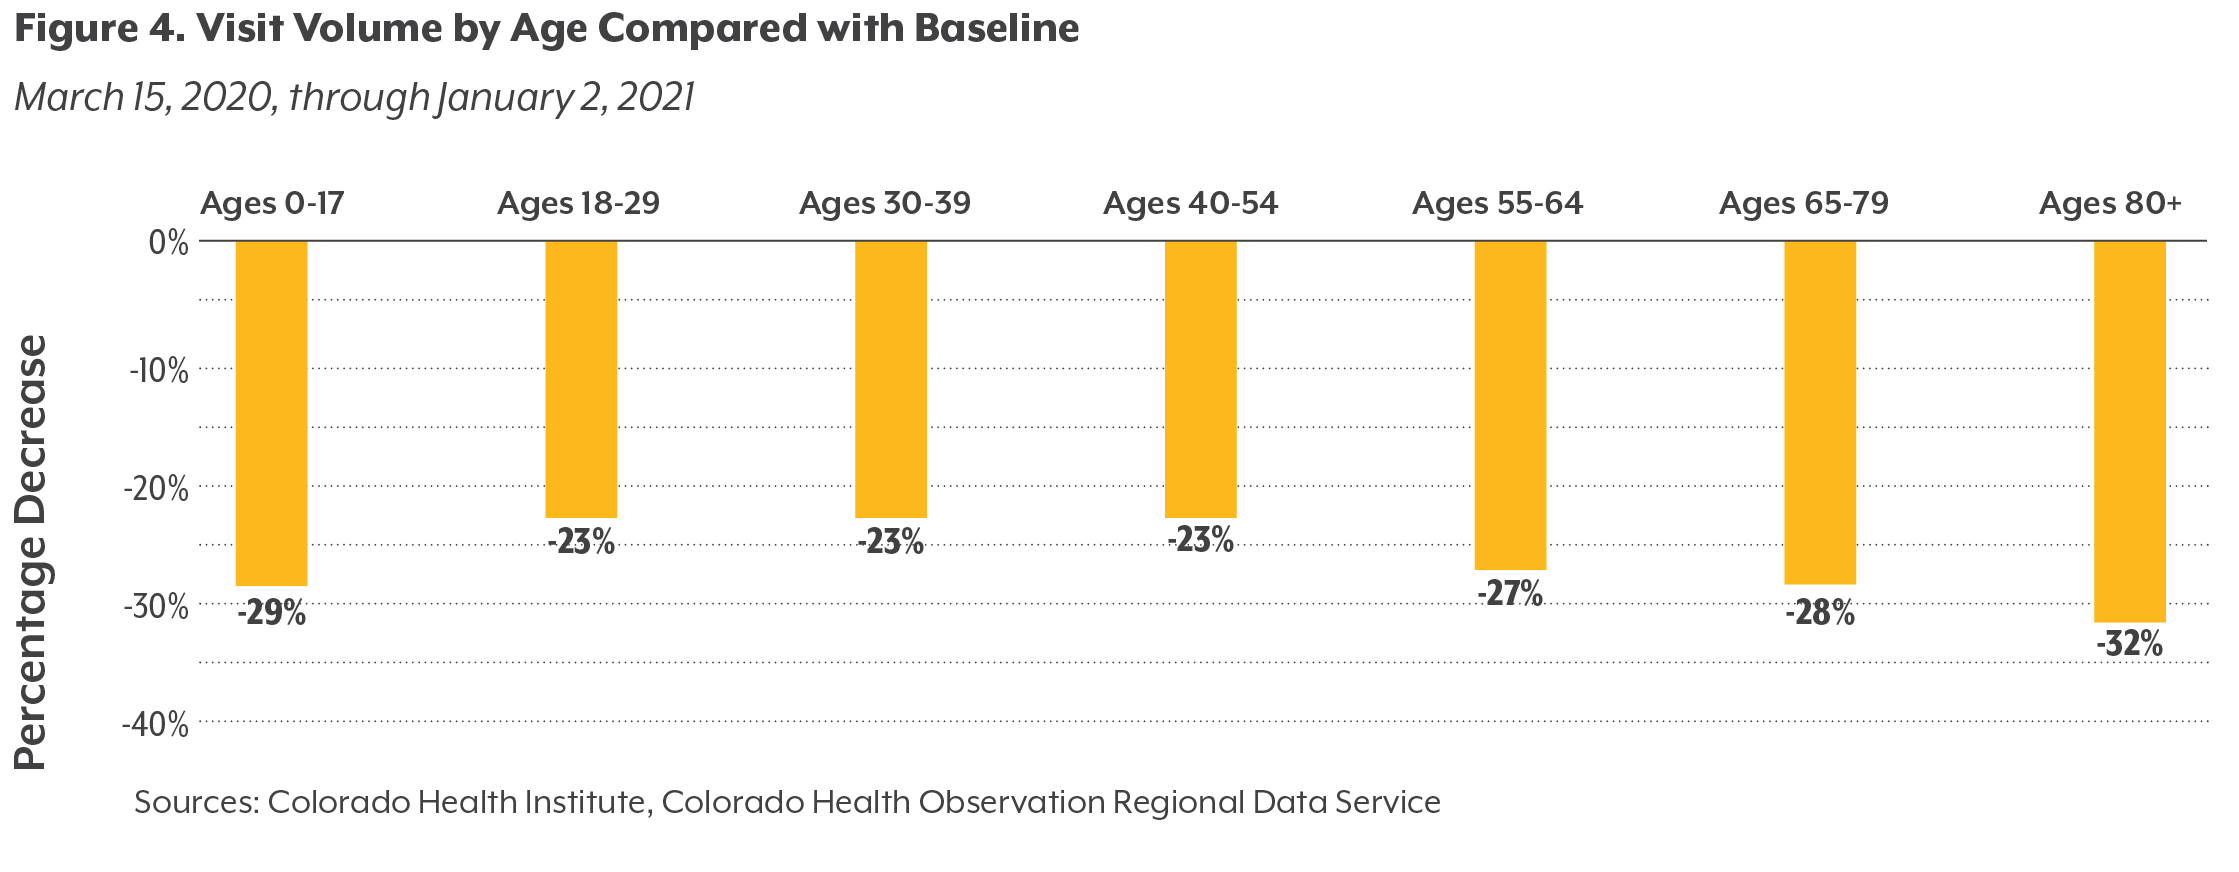 Graphic showing decline in care by age, with more missed care for children and older adults